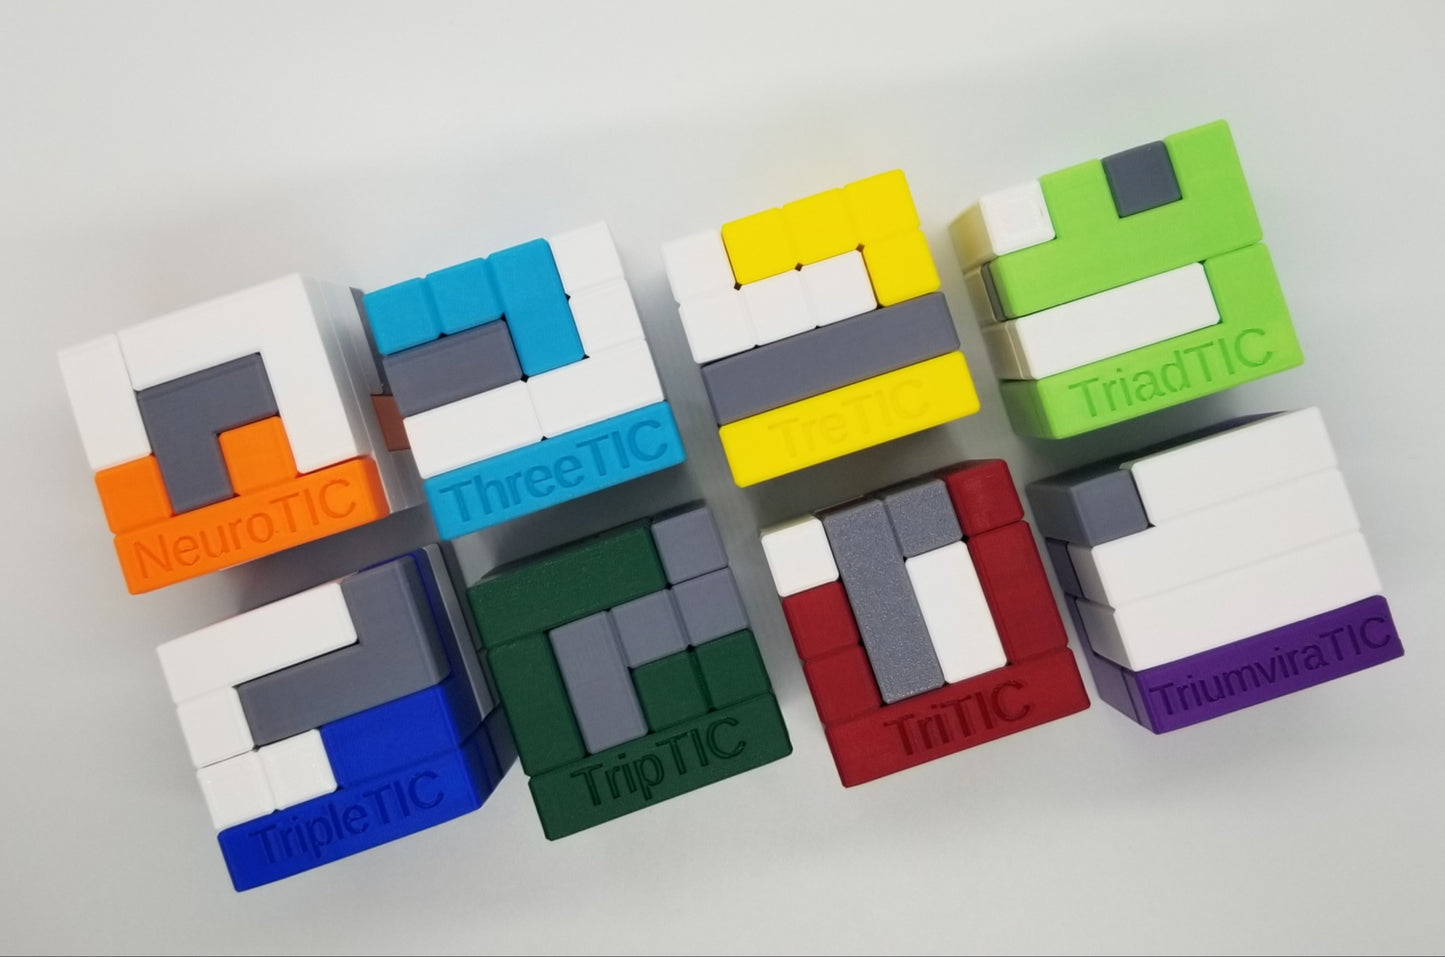 Download 3D Printable STL Files for 8 Three Piece 4x4x4 Turning Interlocking Cube Puzzles